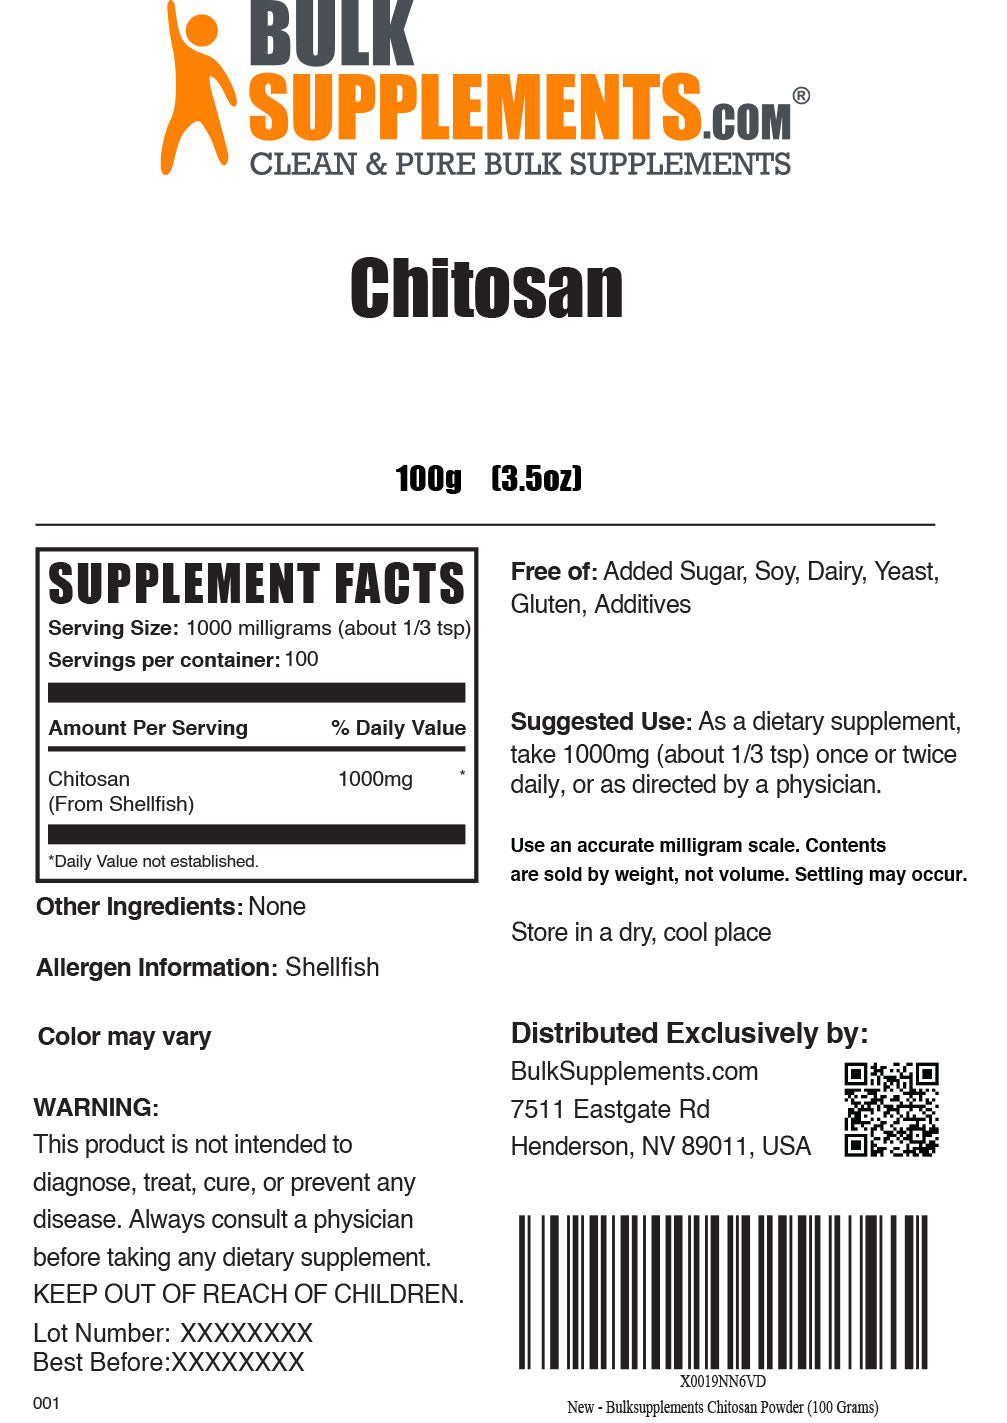 100g chitosan supplement facts label